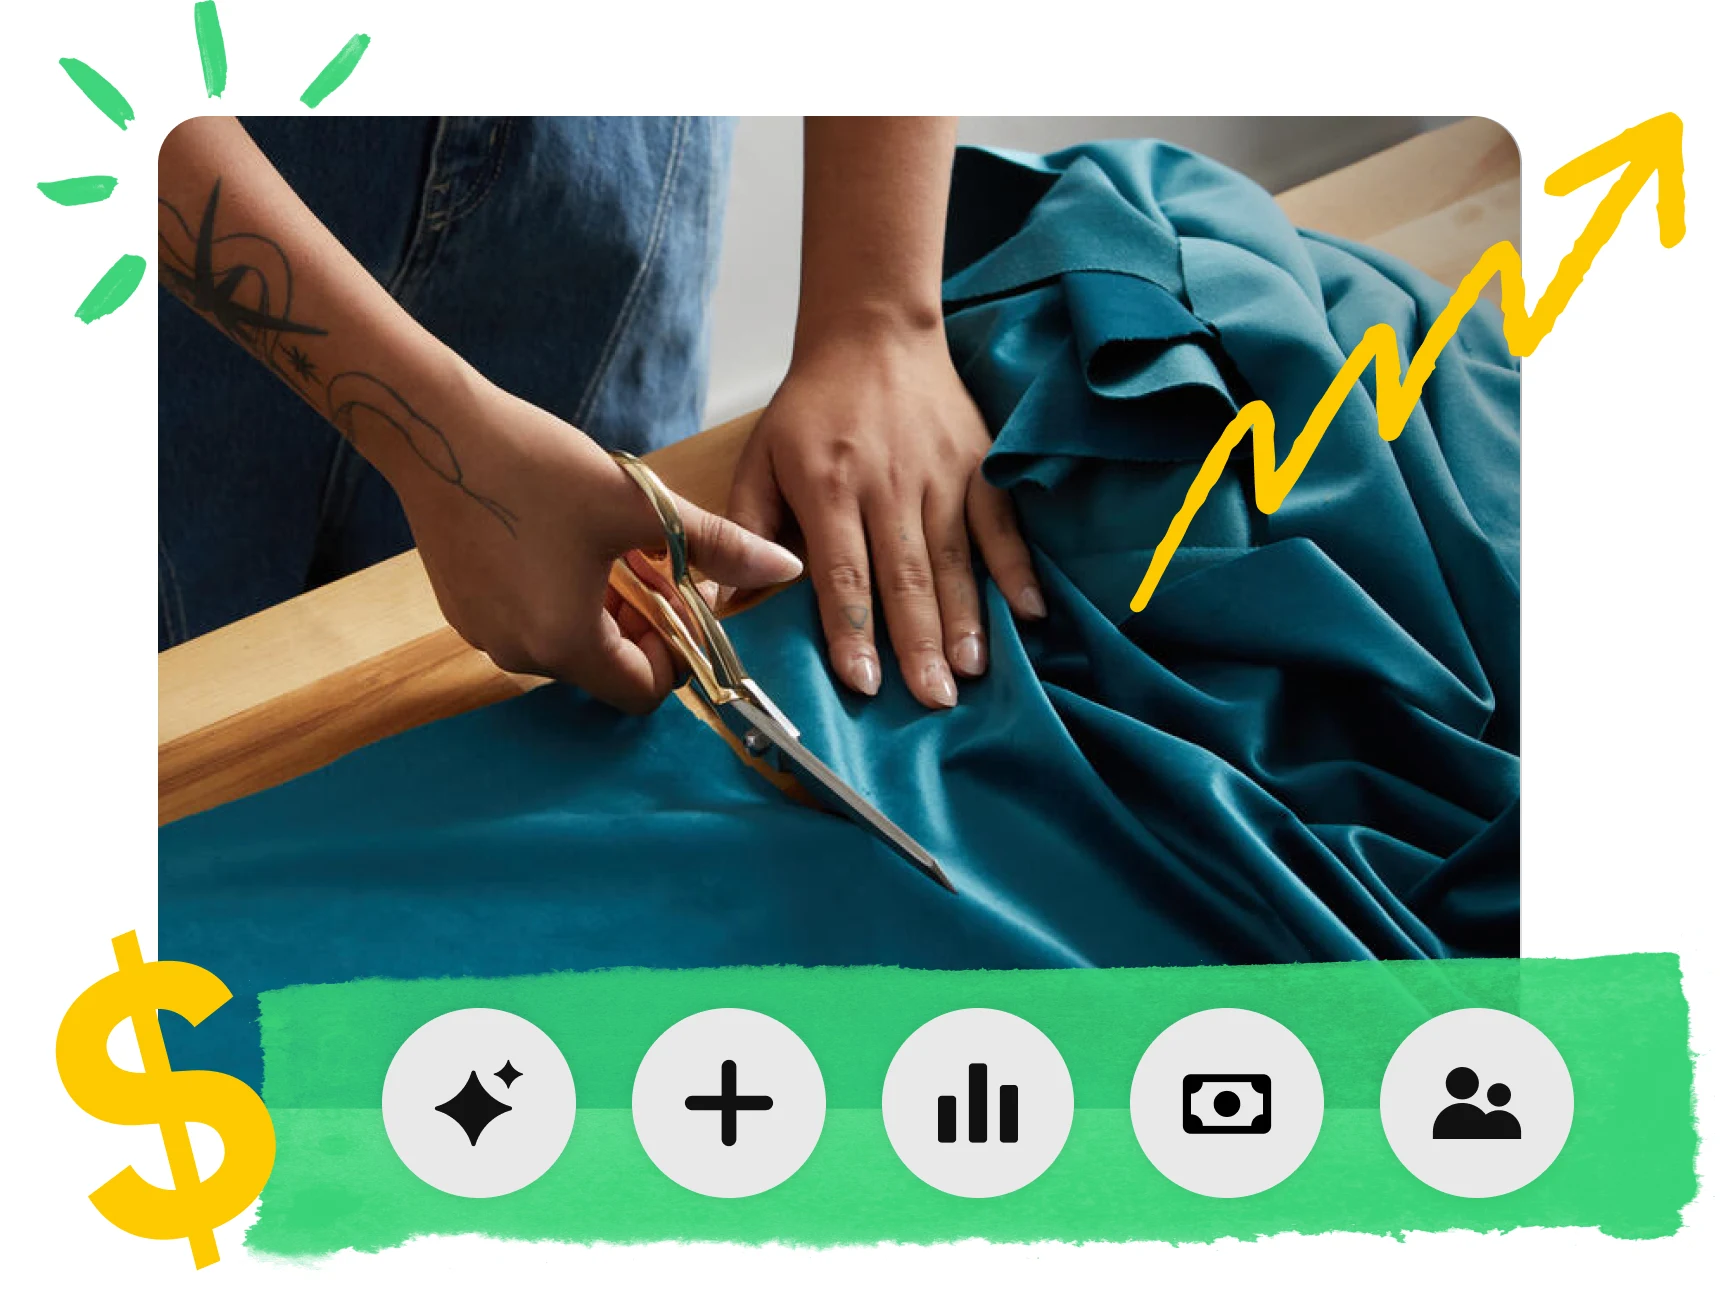 Close-up of a person cutting a bolt of teal fabric, with a yellow dollar sign on the bottom left-hand side and a yellow zigzag arrow pointing up to the right 